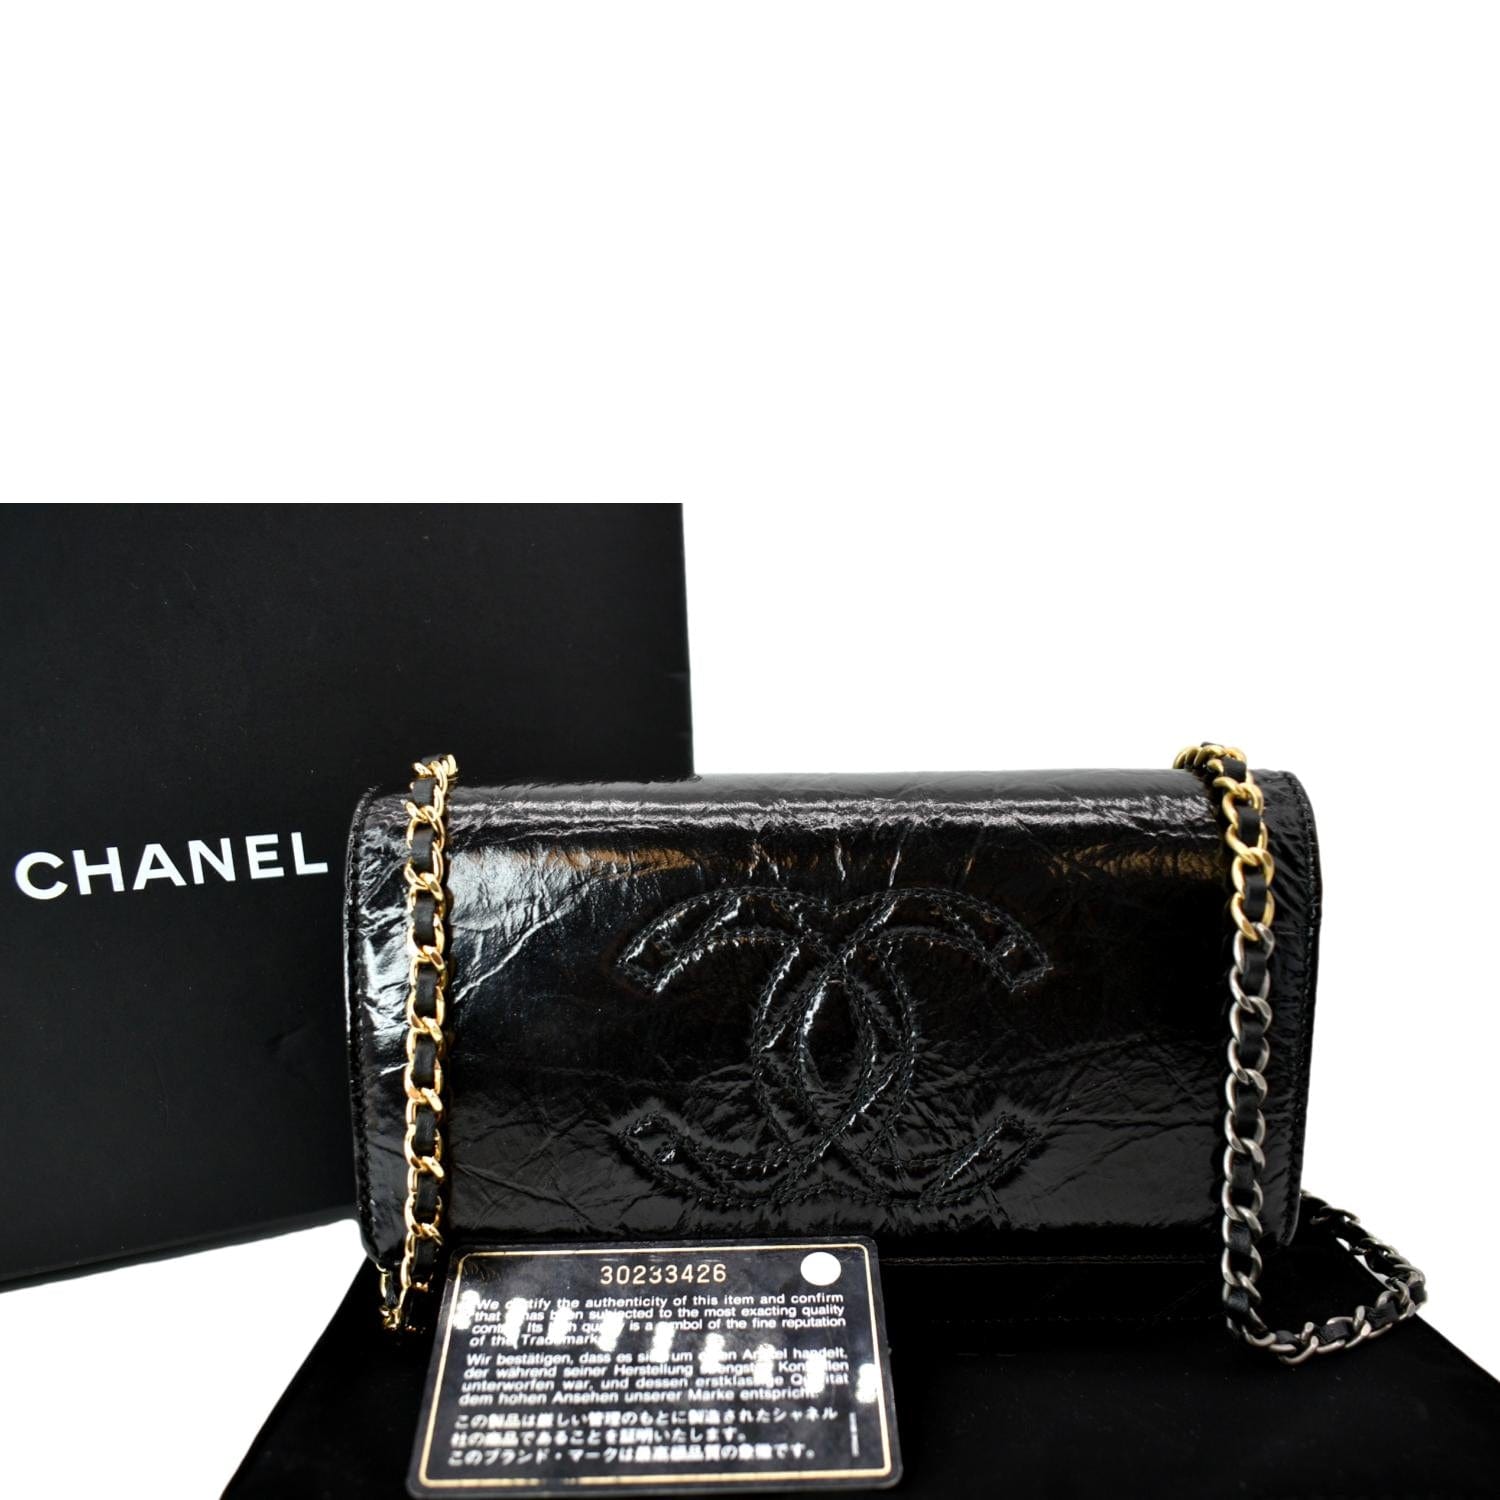 CHANEL Wallet On Chain Patent Leather Shoulder Crossbody Bag E4904 